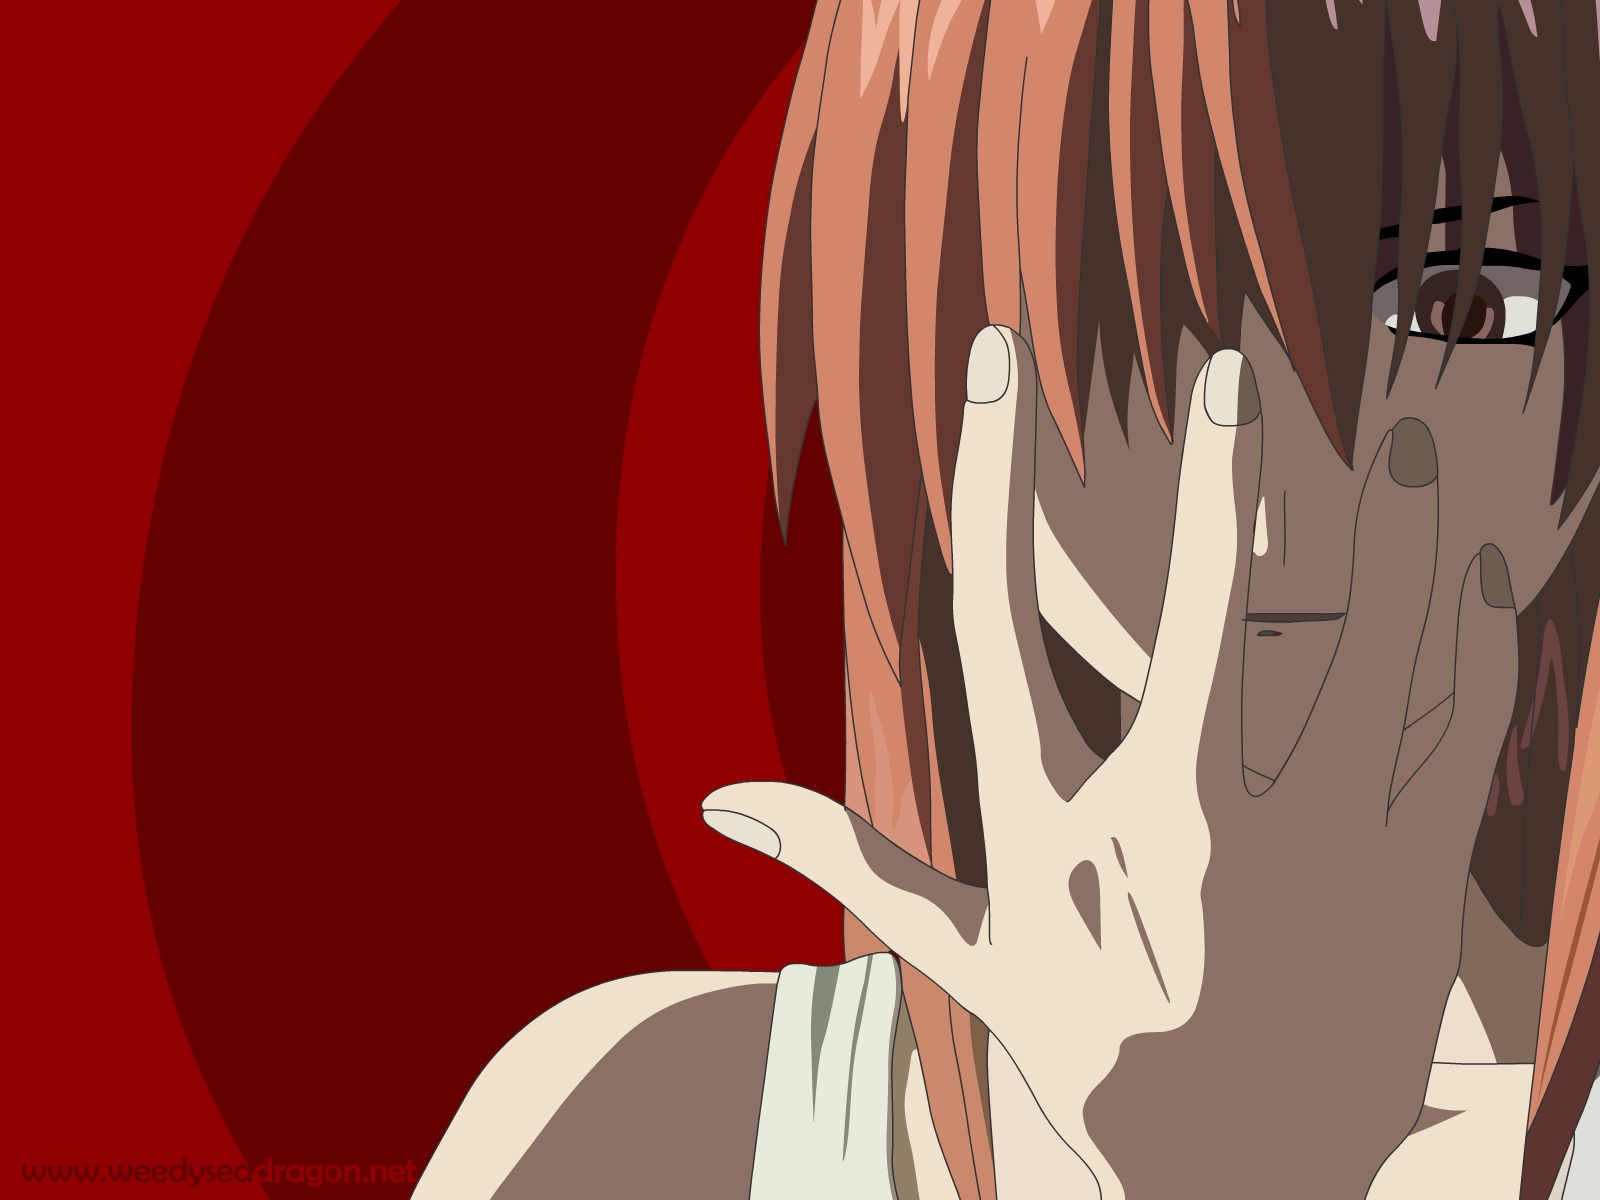 Anime character from Elfen Lied, Lucy, posing against a scenic background as a desktop wallpaper.